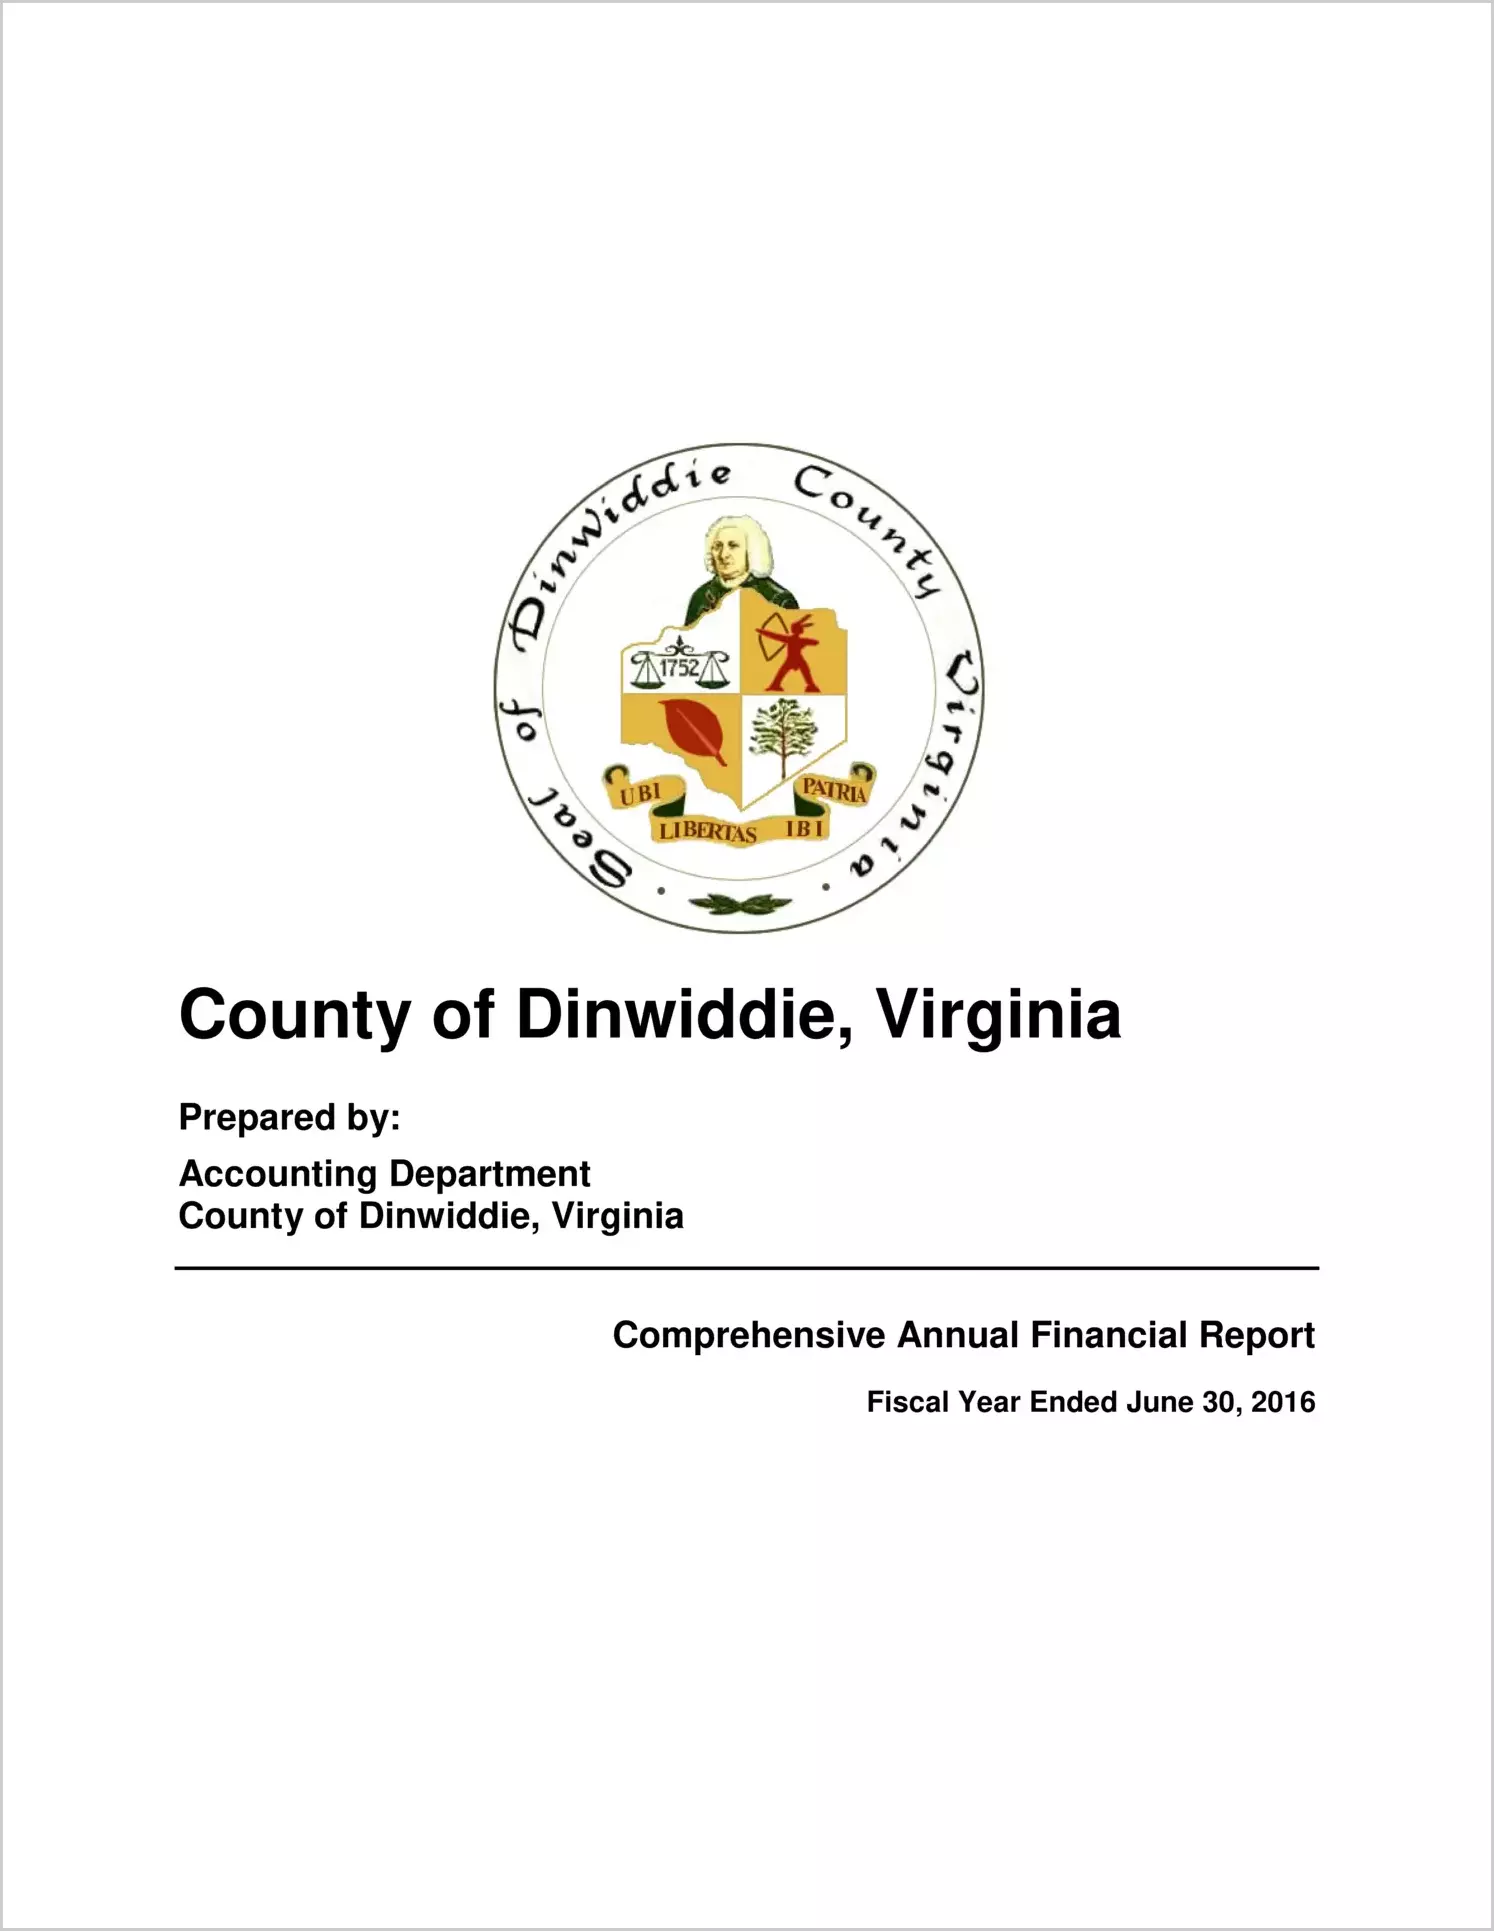 2016 Annual Financial Report for County of Dinwiddie